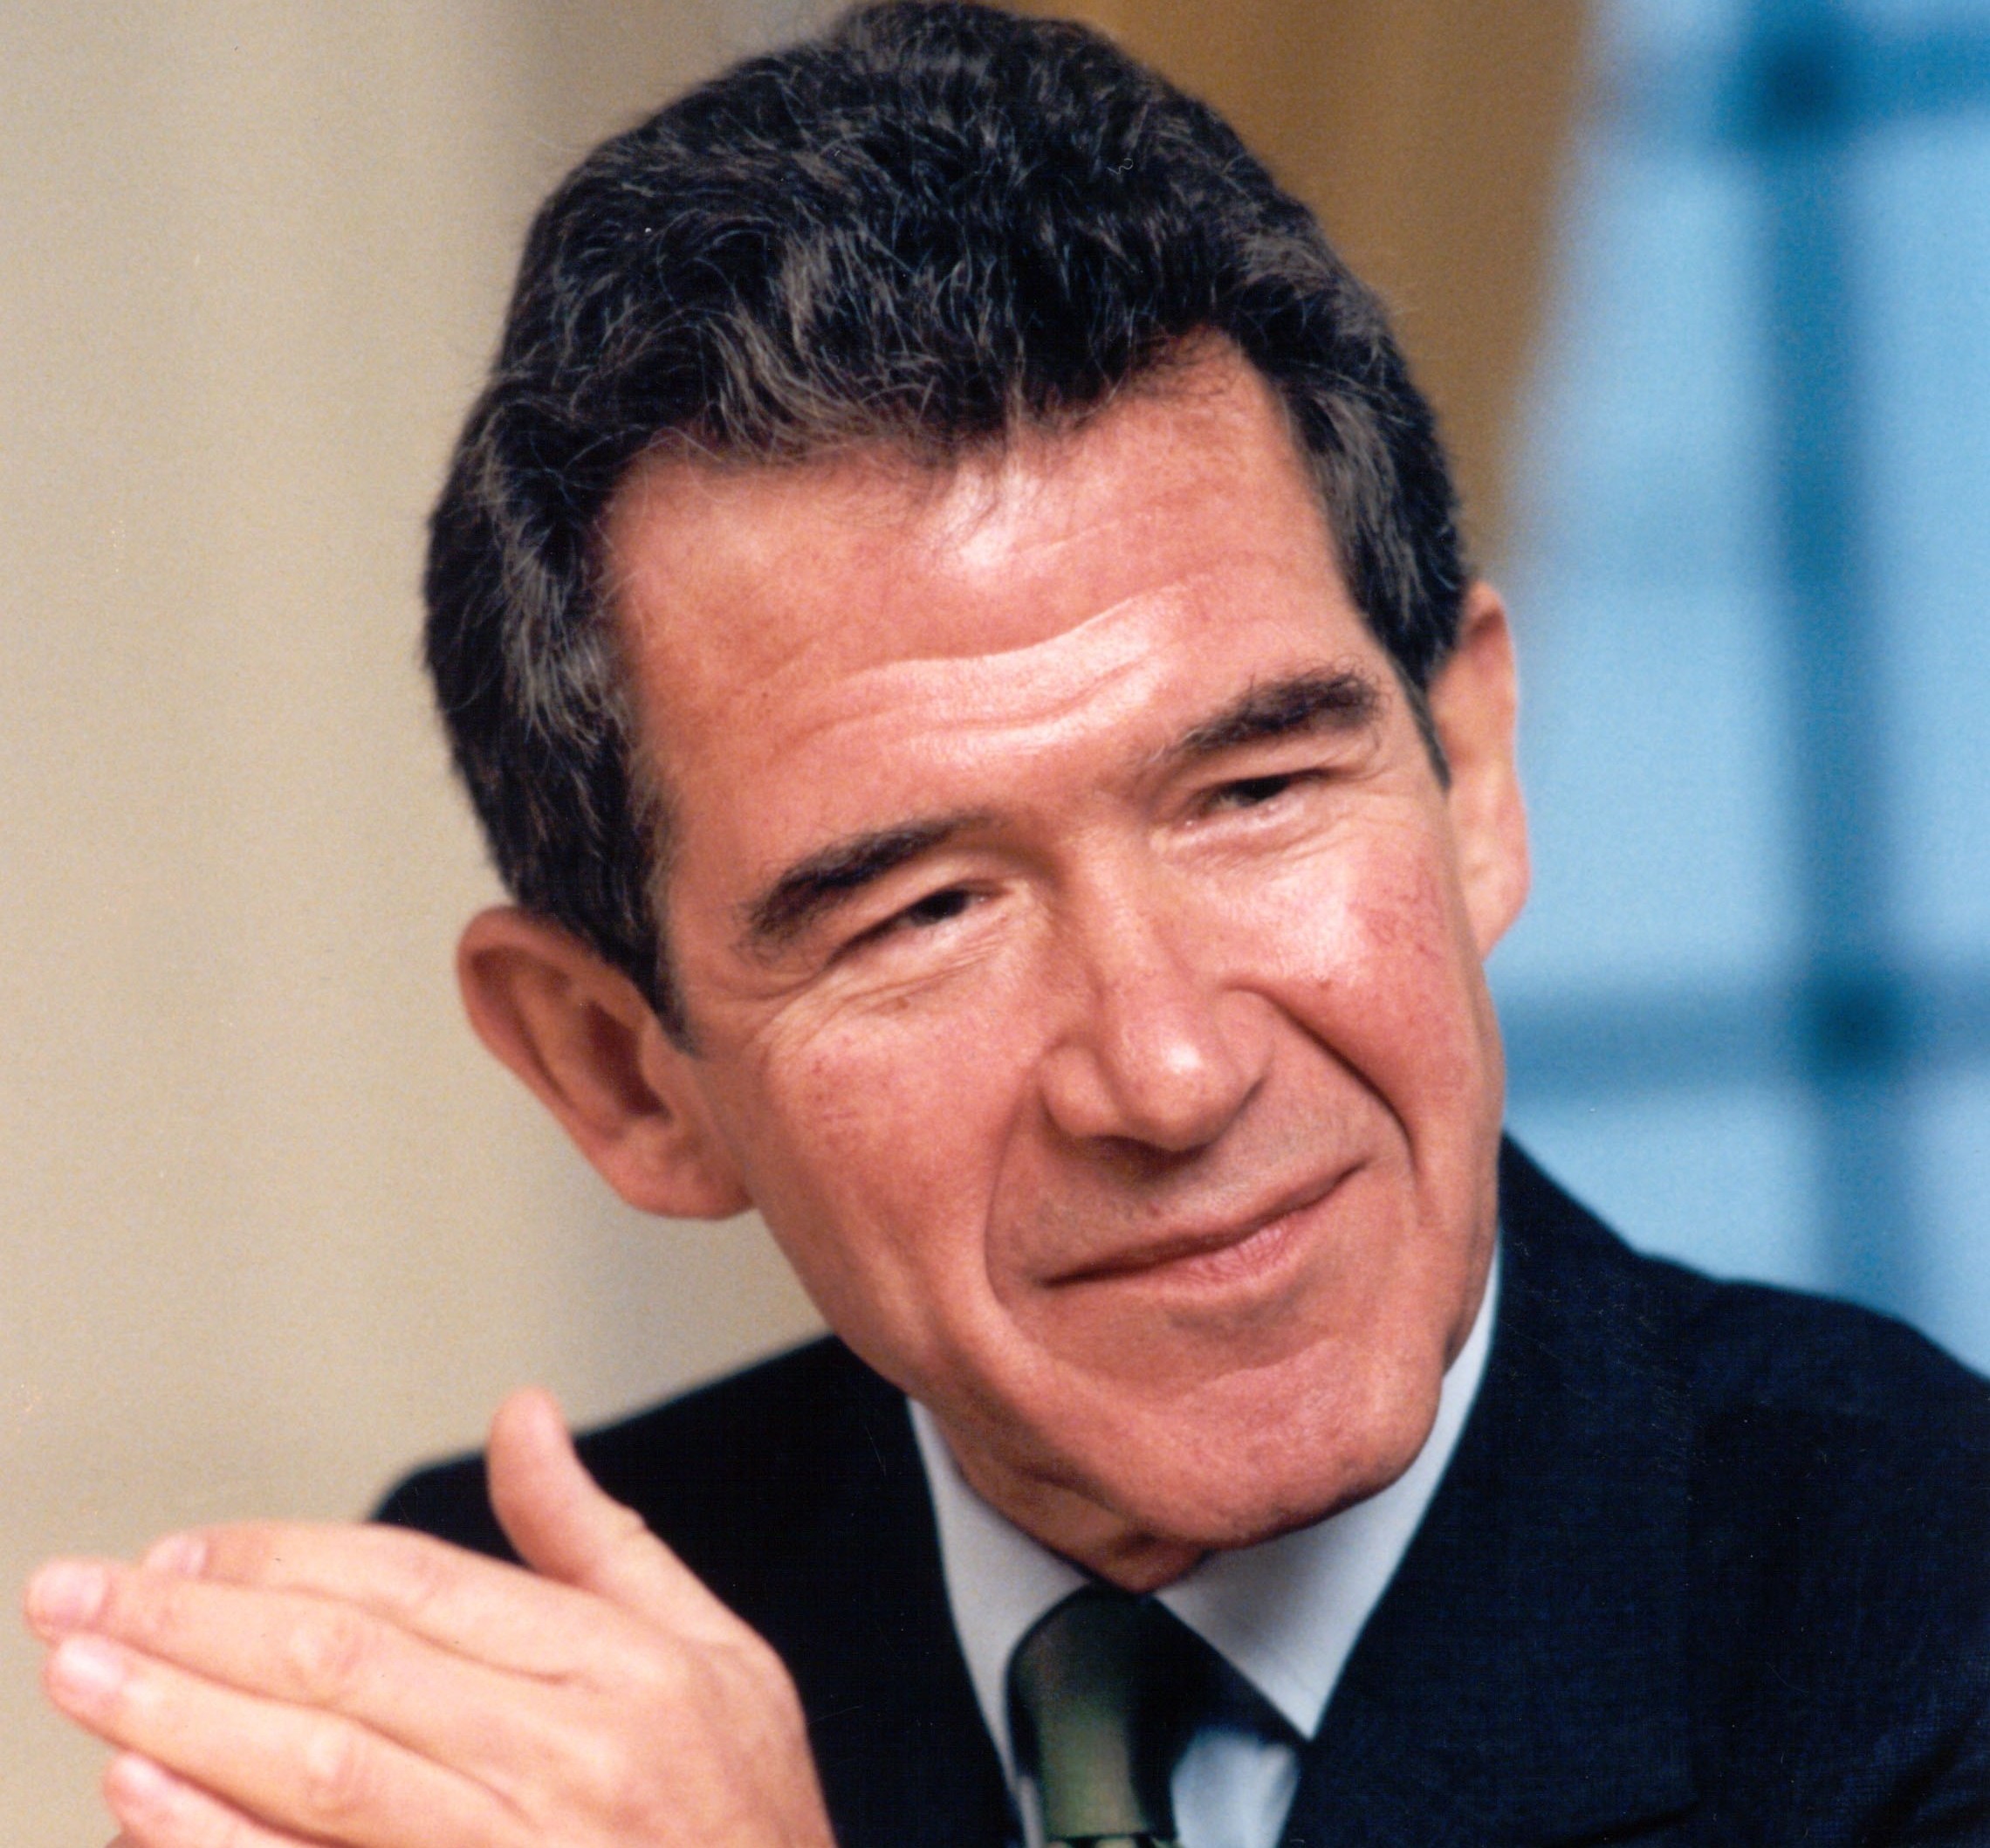 Lord Browne, former chief executive of BP